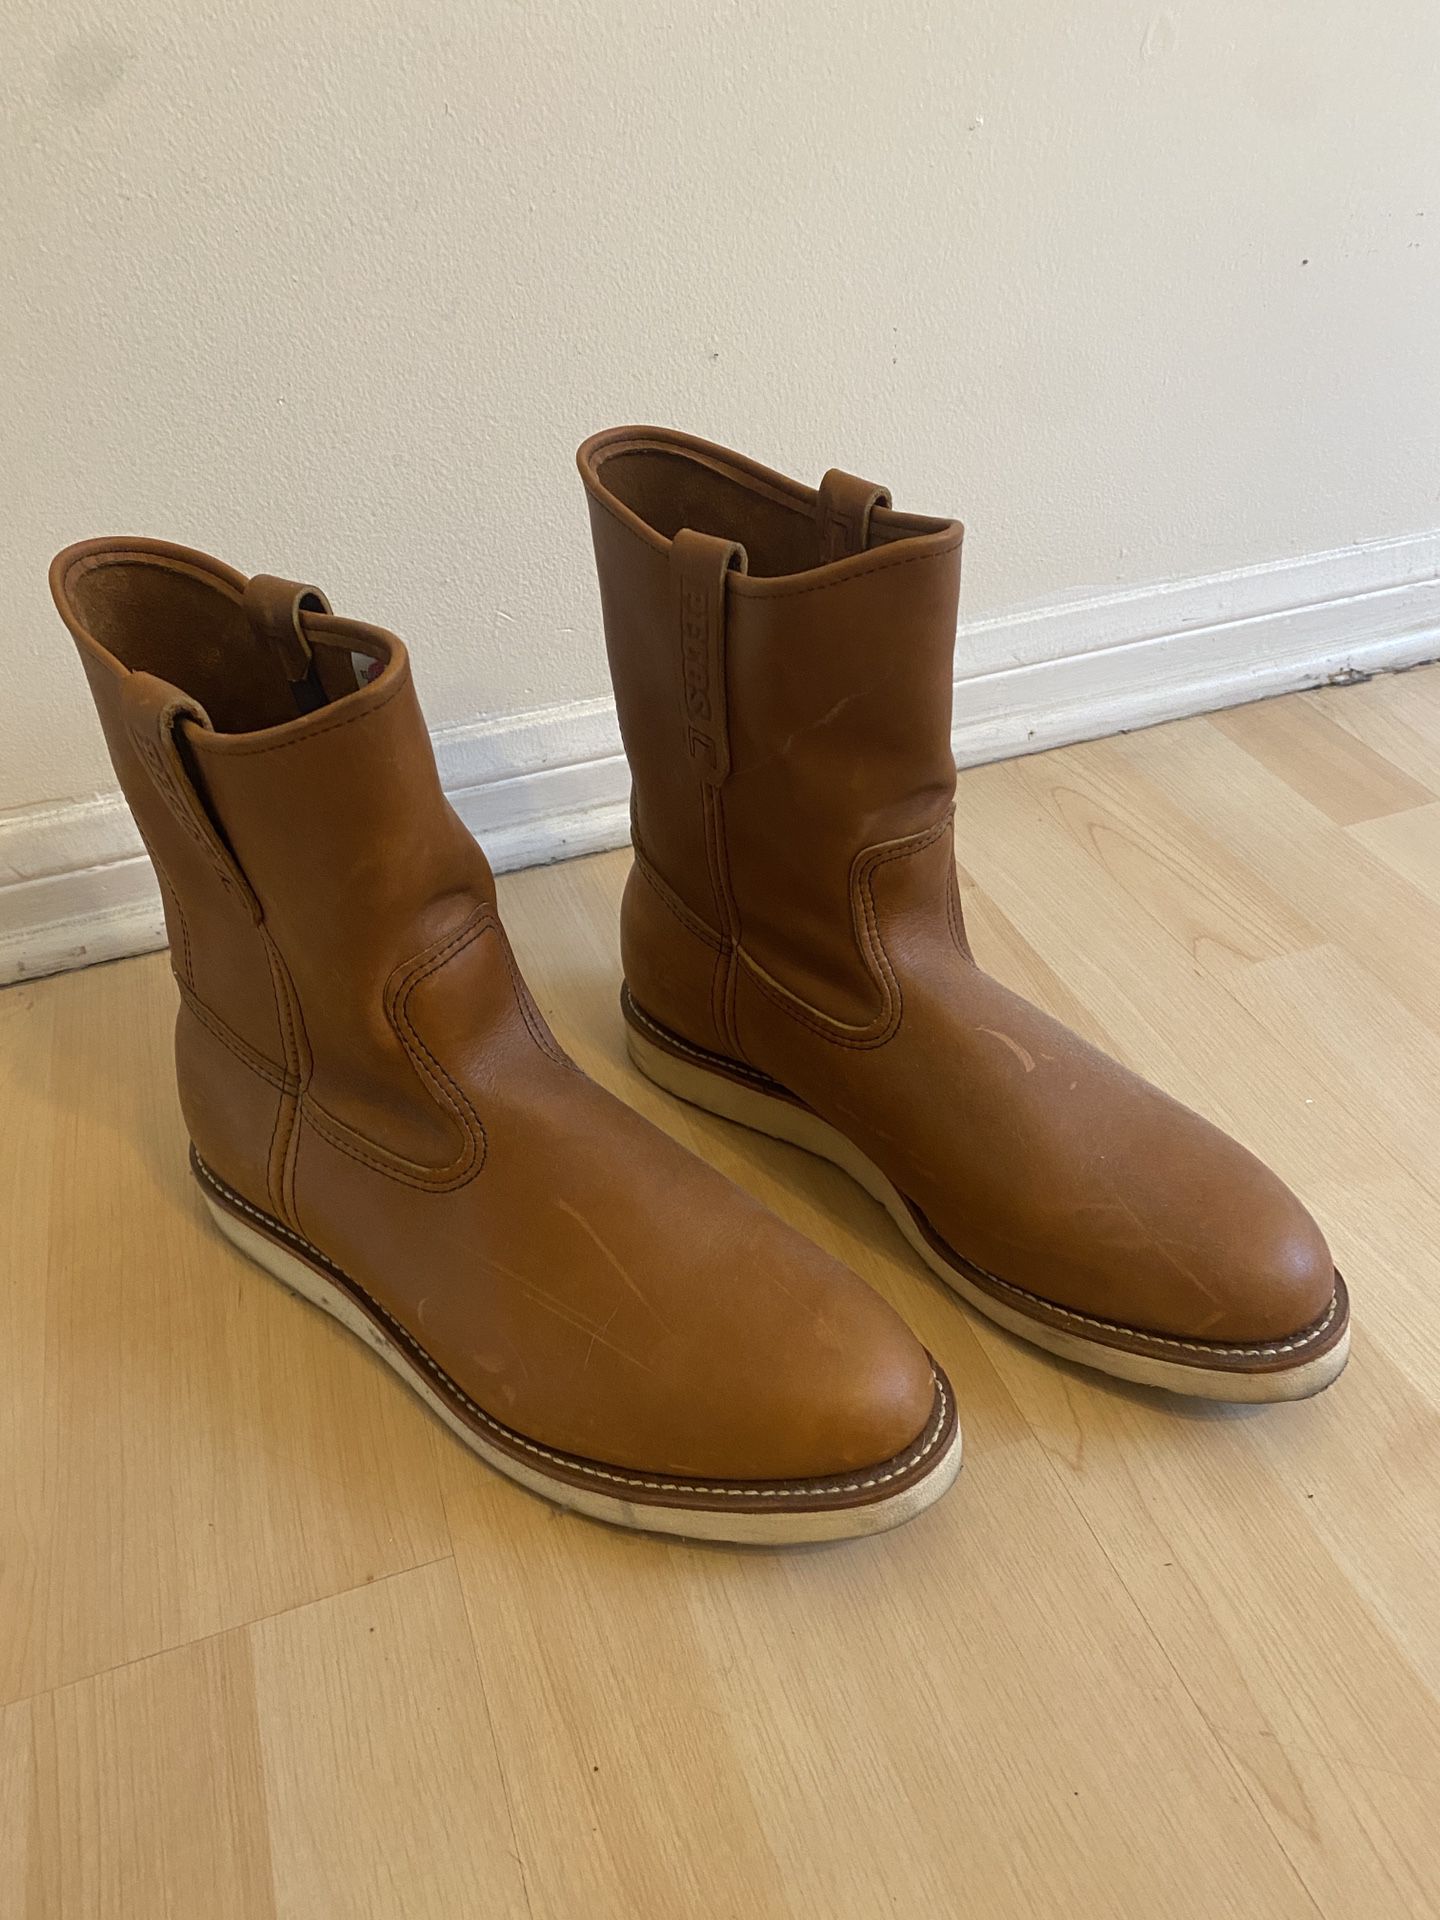 Red Wing Shoes - Work Boots - Men’s 11 -$155 OBO